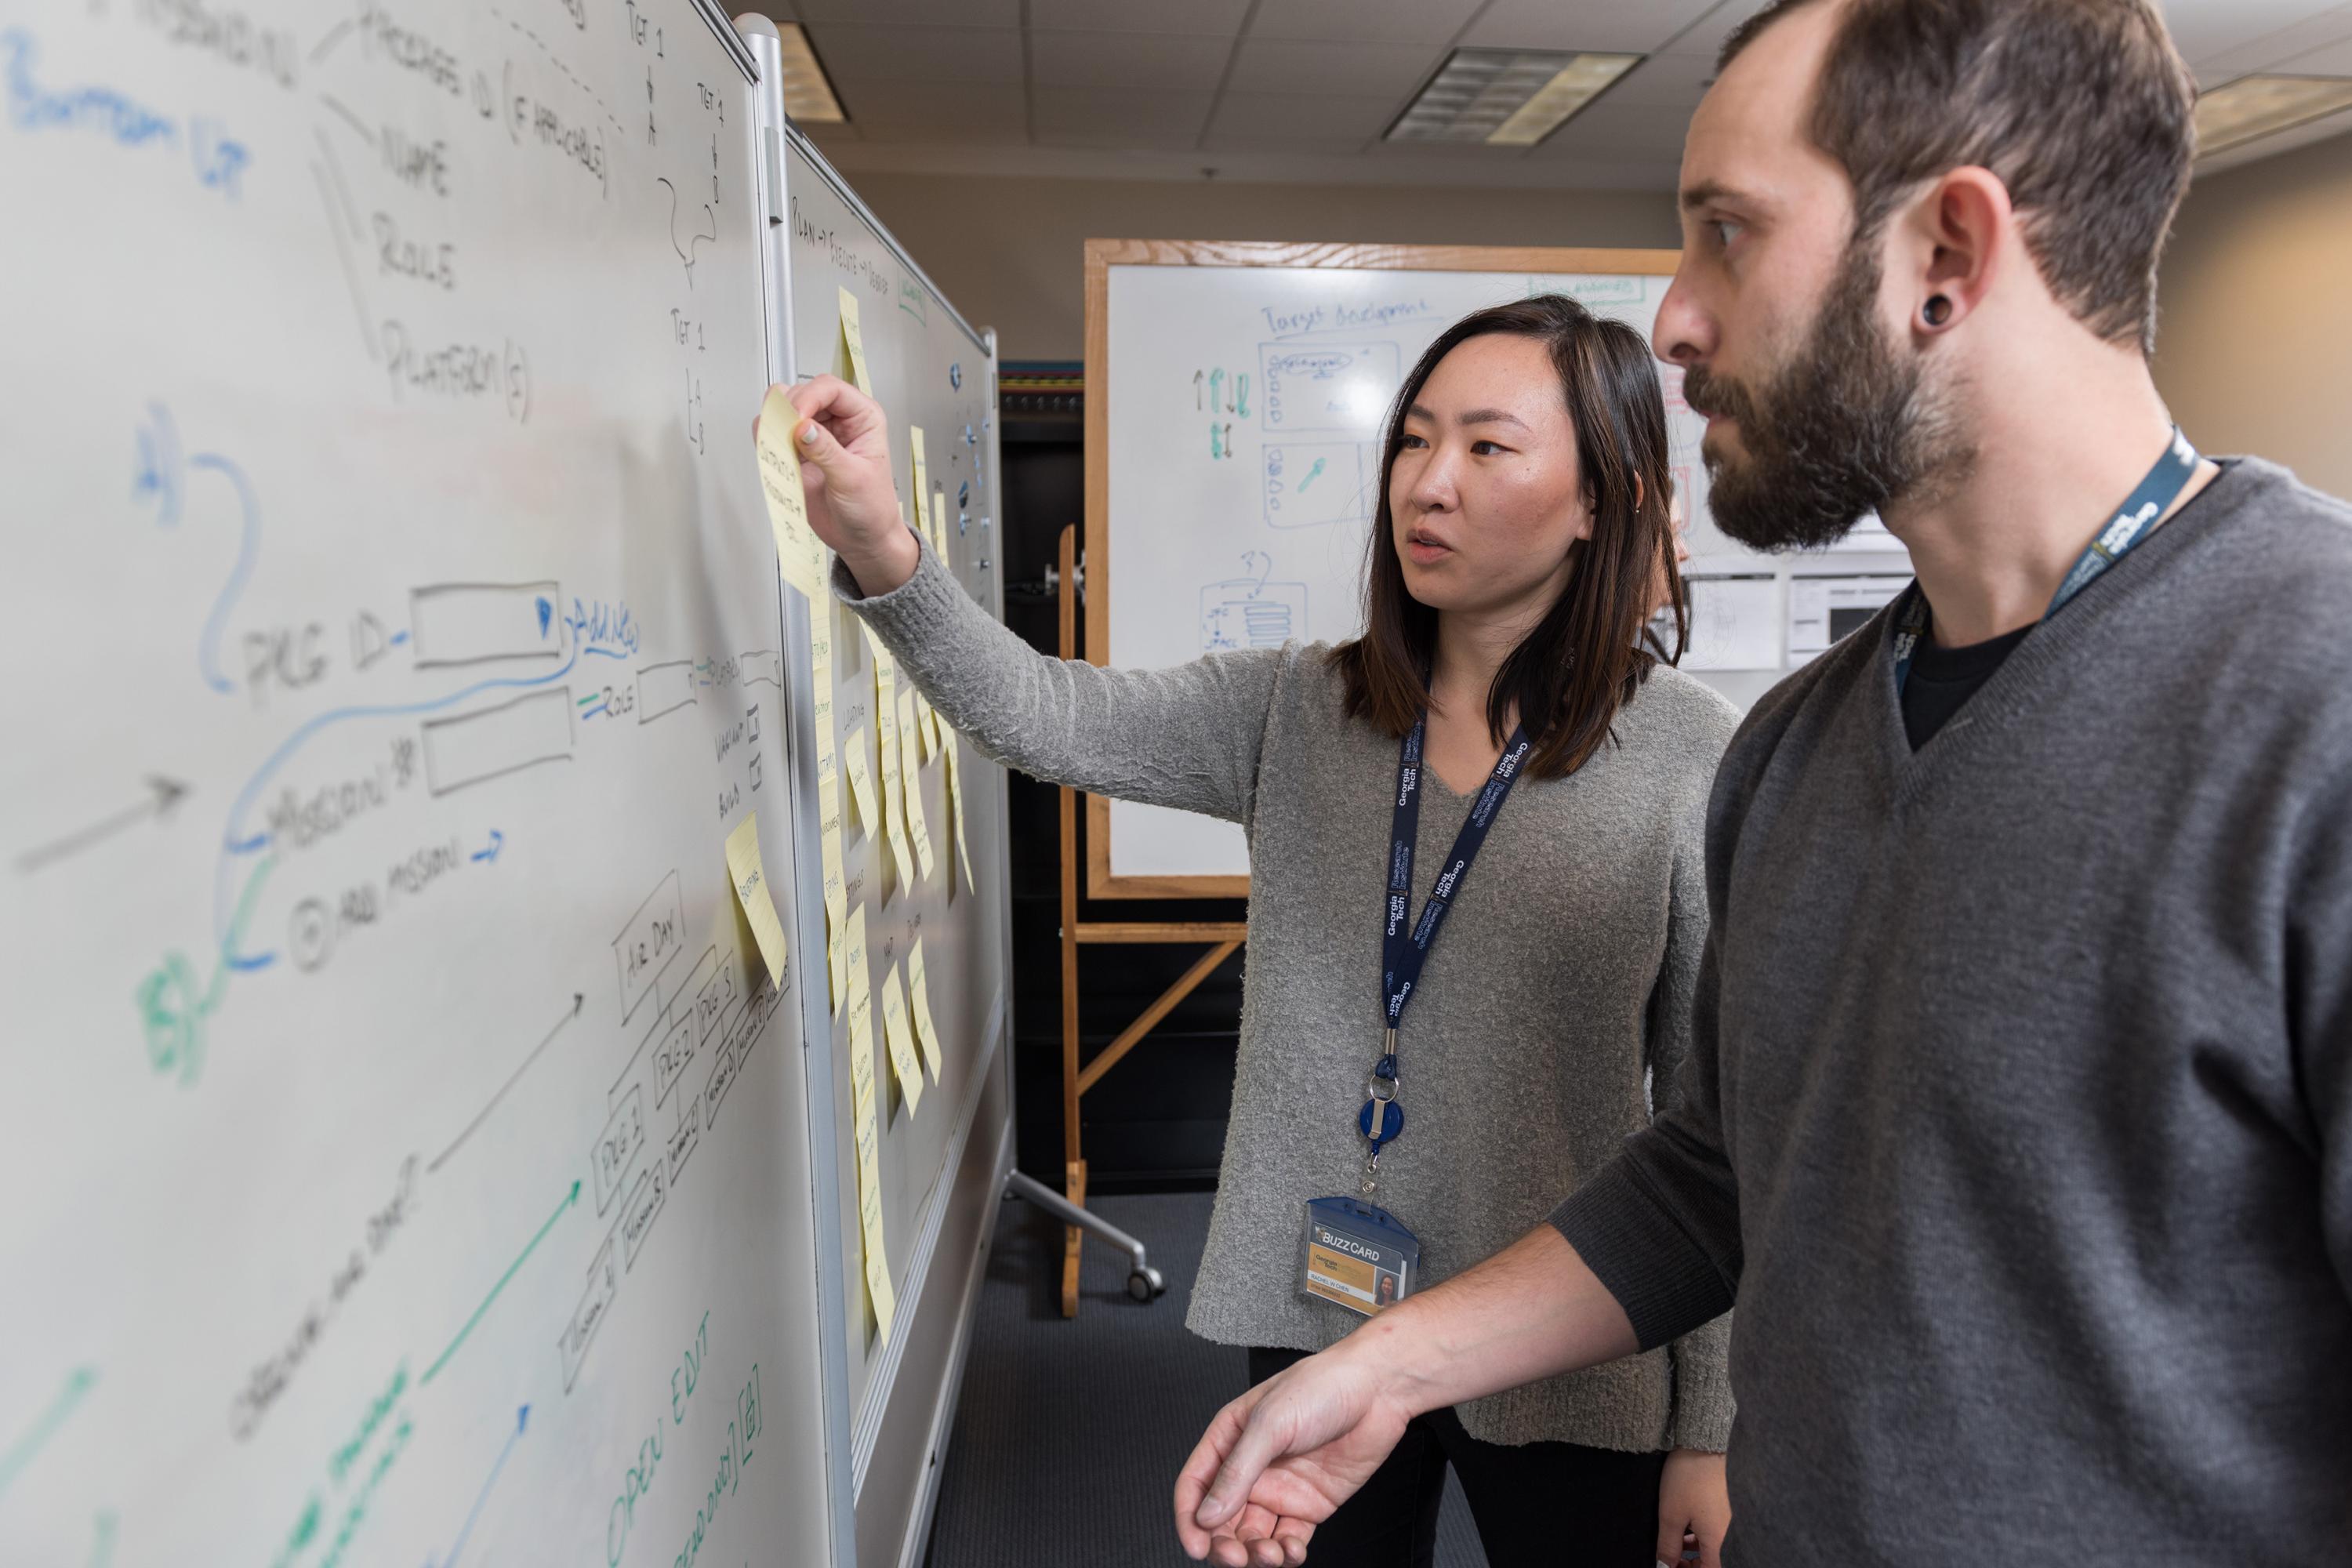 GTRI Research Scientist Andew Baranak and Georgia Tech Graduate Student Rachel Chen discuss creating user interface workflows for the mission planning task. (Credit: Rob Felt, Georgia Tech)